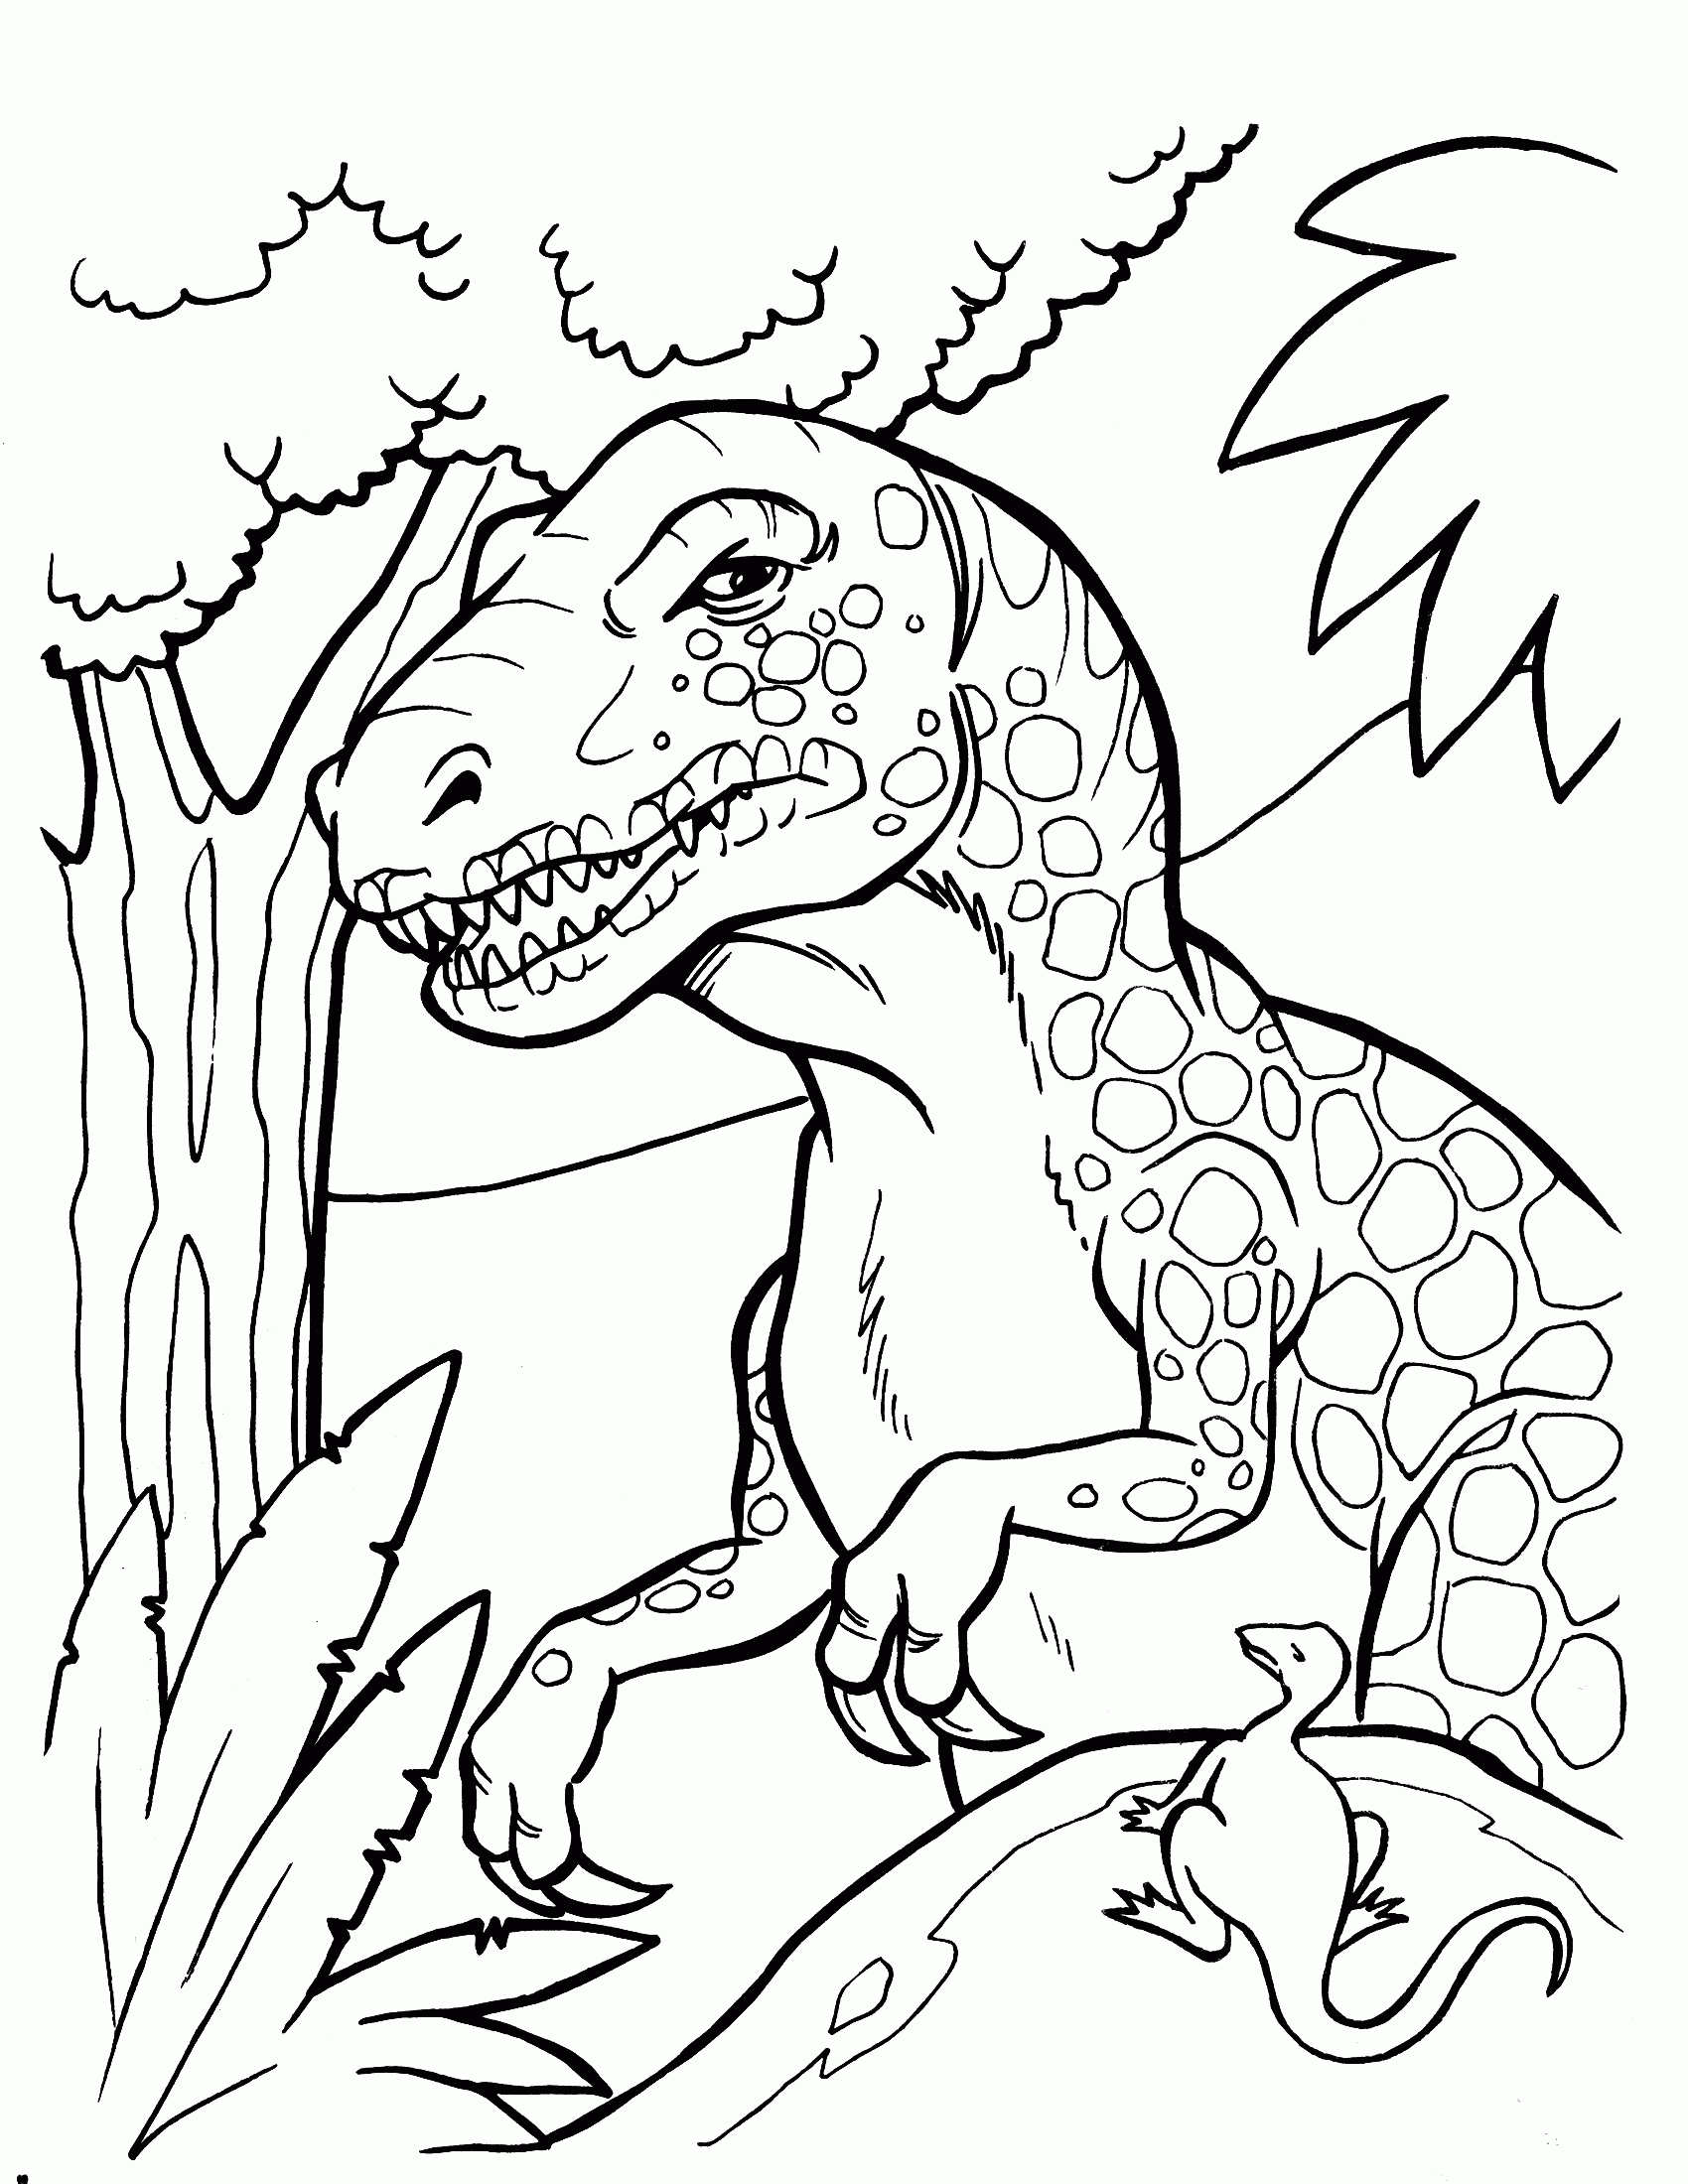 Free Dinosaur Printable Coloring Pages   Coloring Home